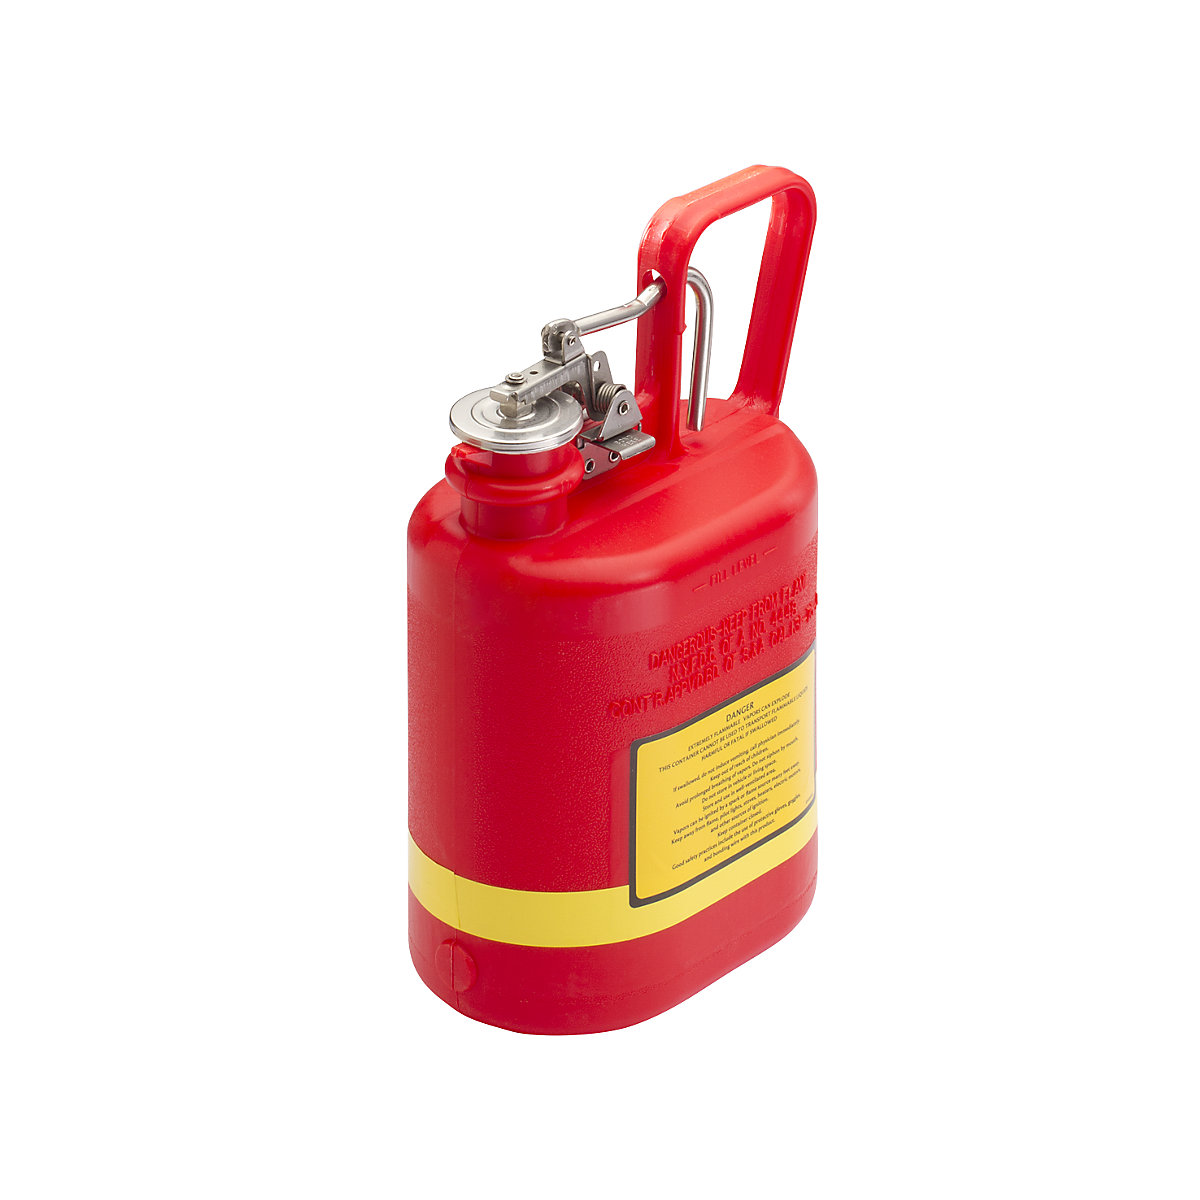 PE safety container - Justrite